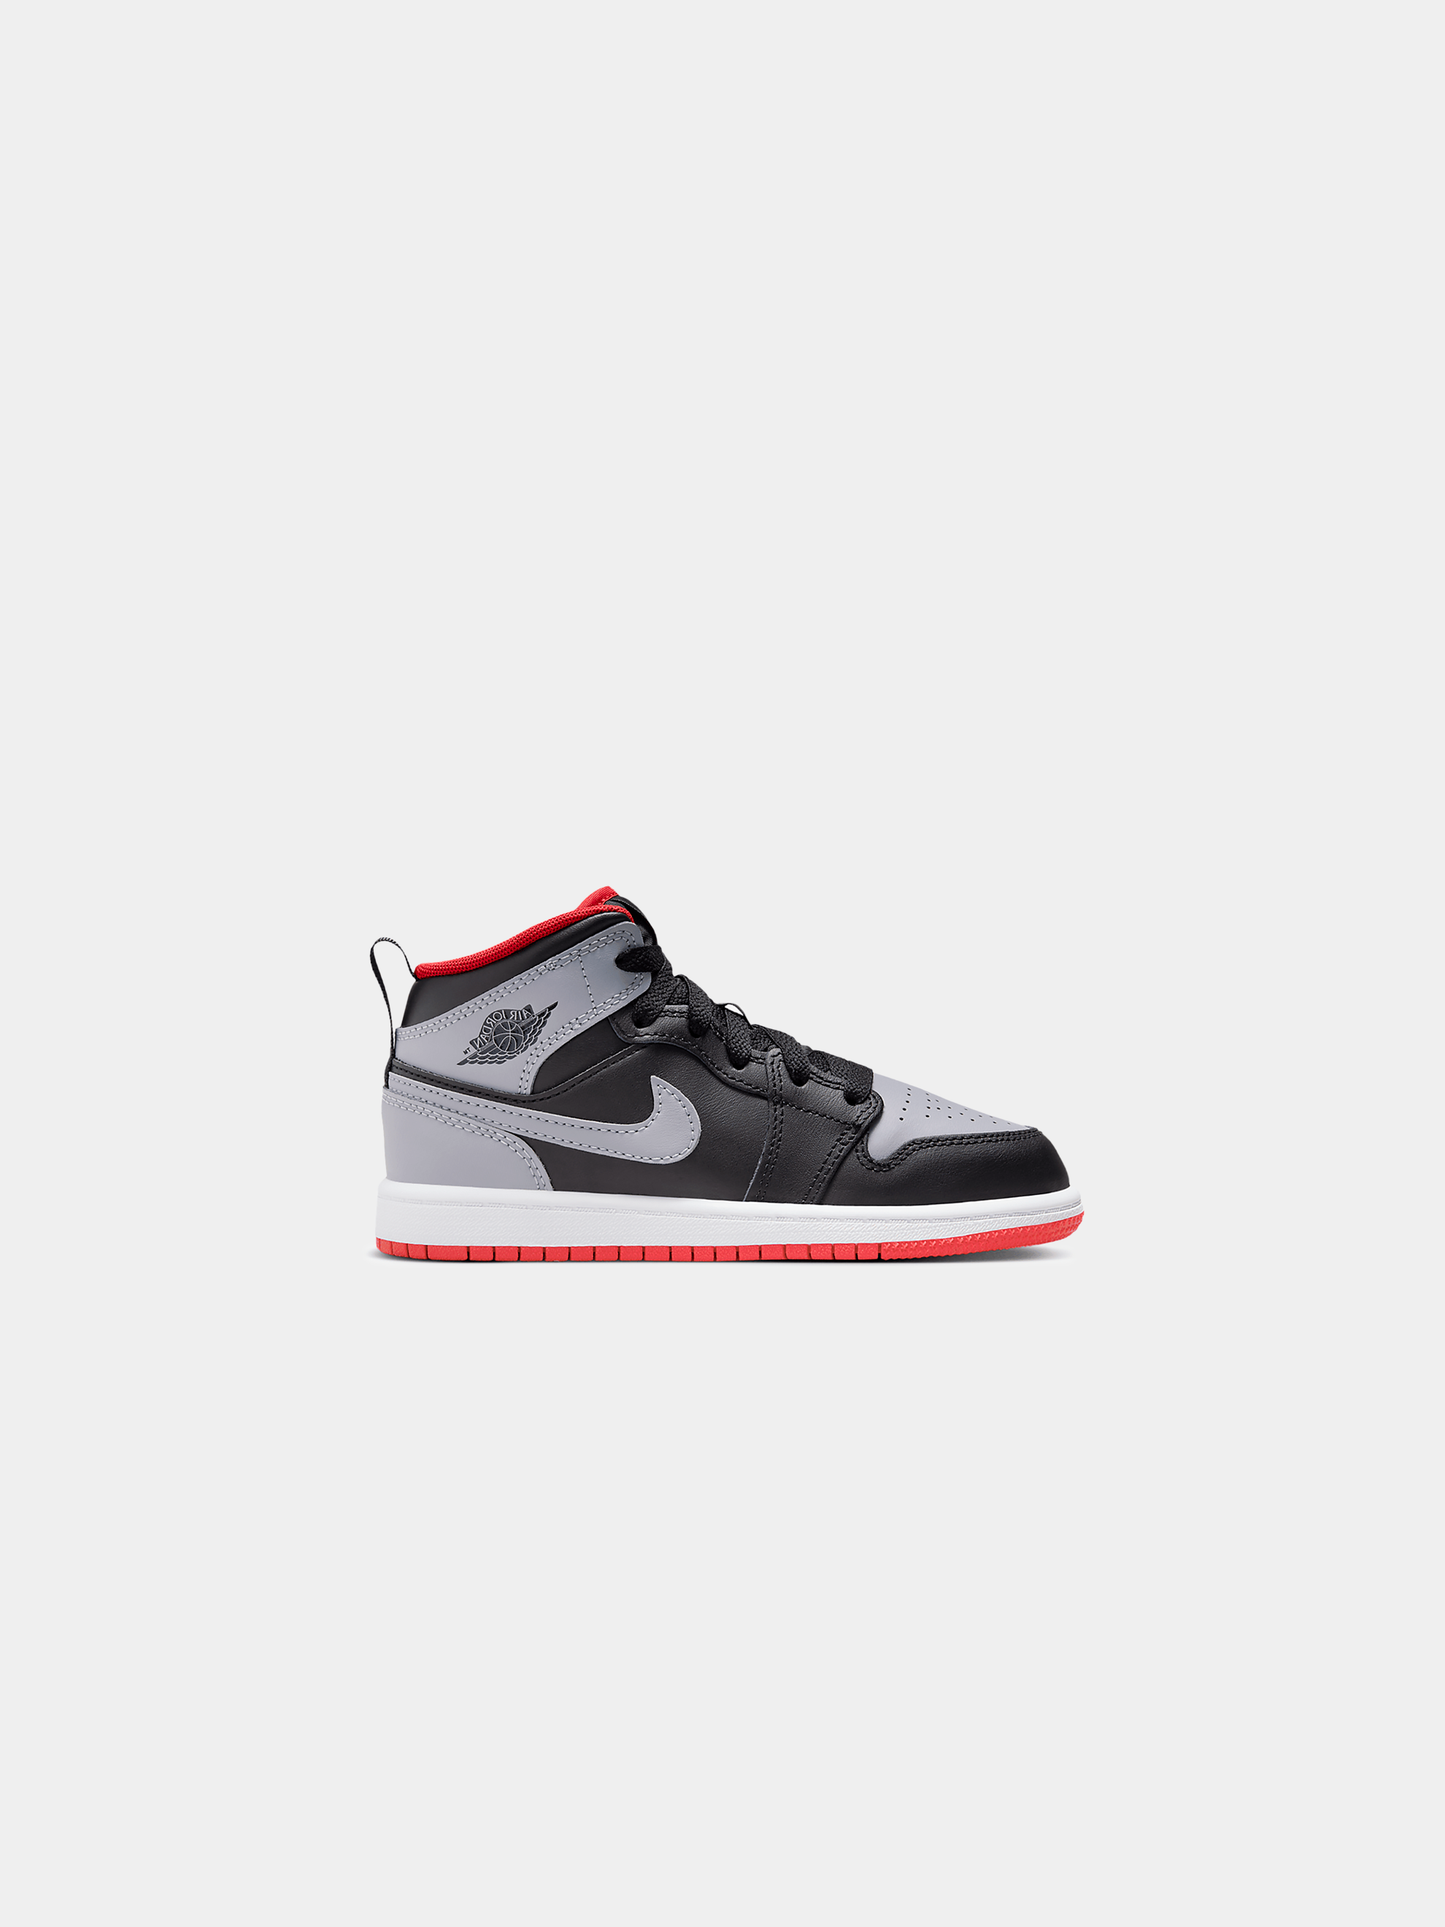 PS Jordan 1 Mid (Black/Cement Grey/Fire Red/White)